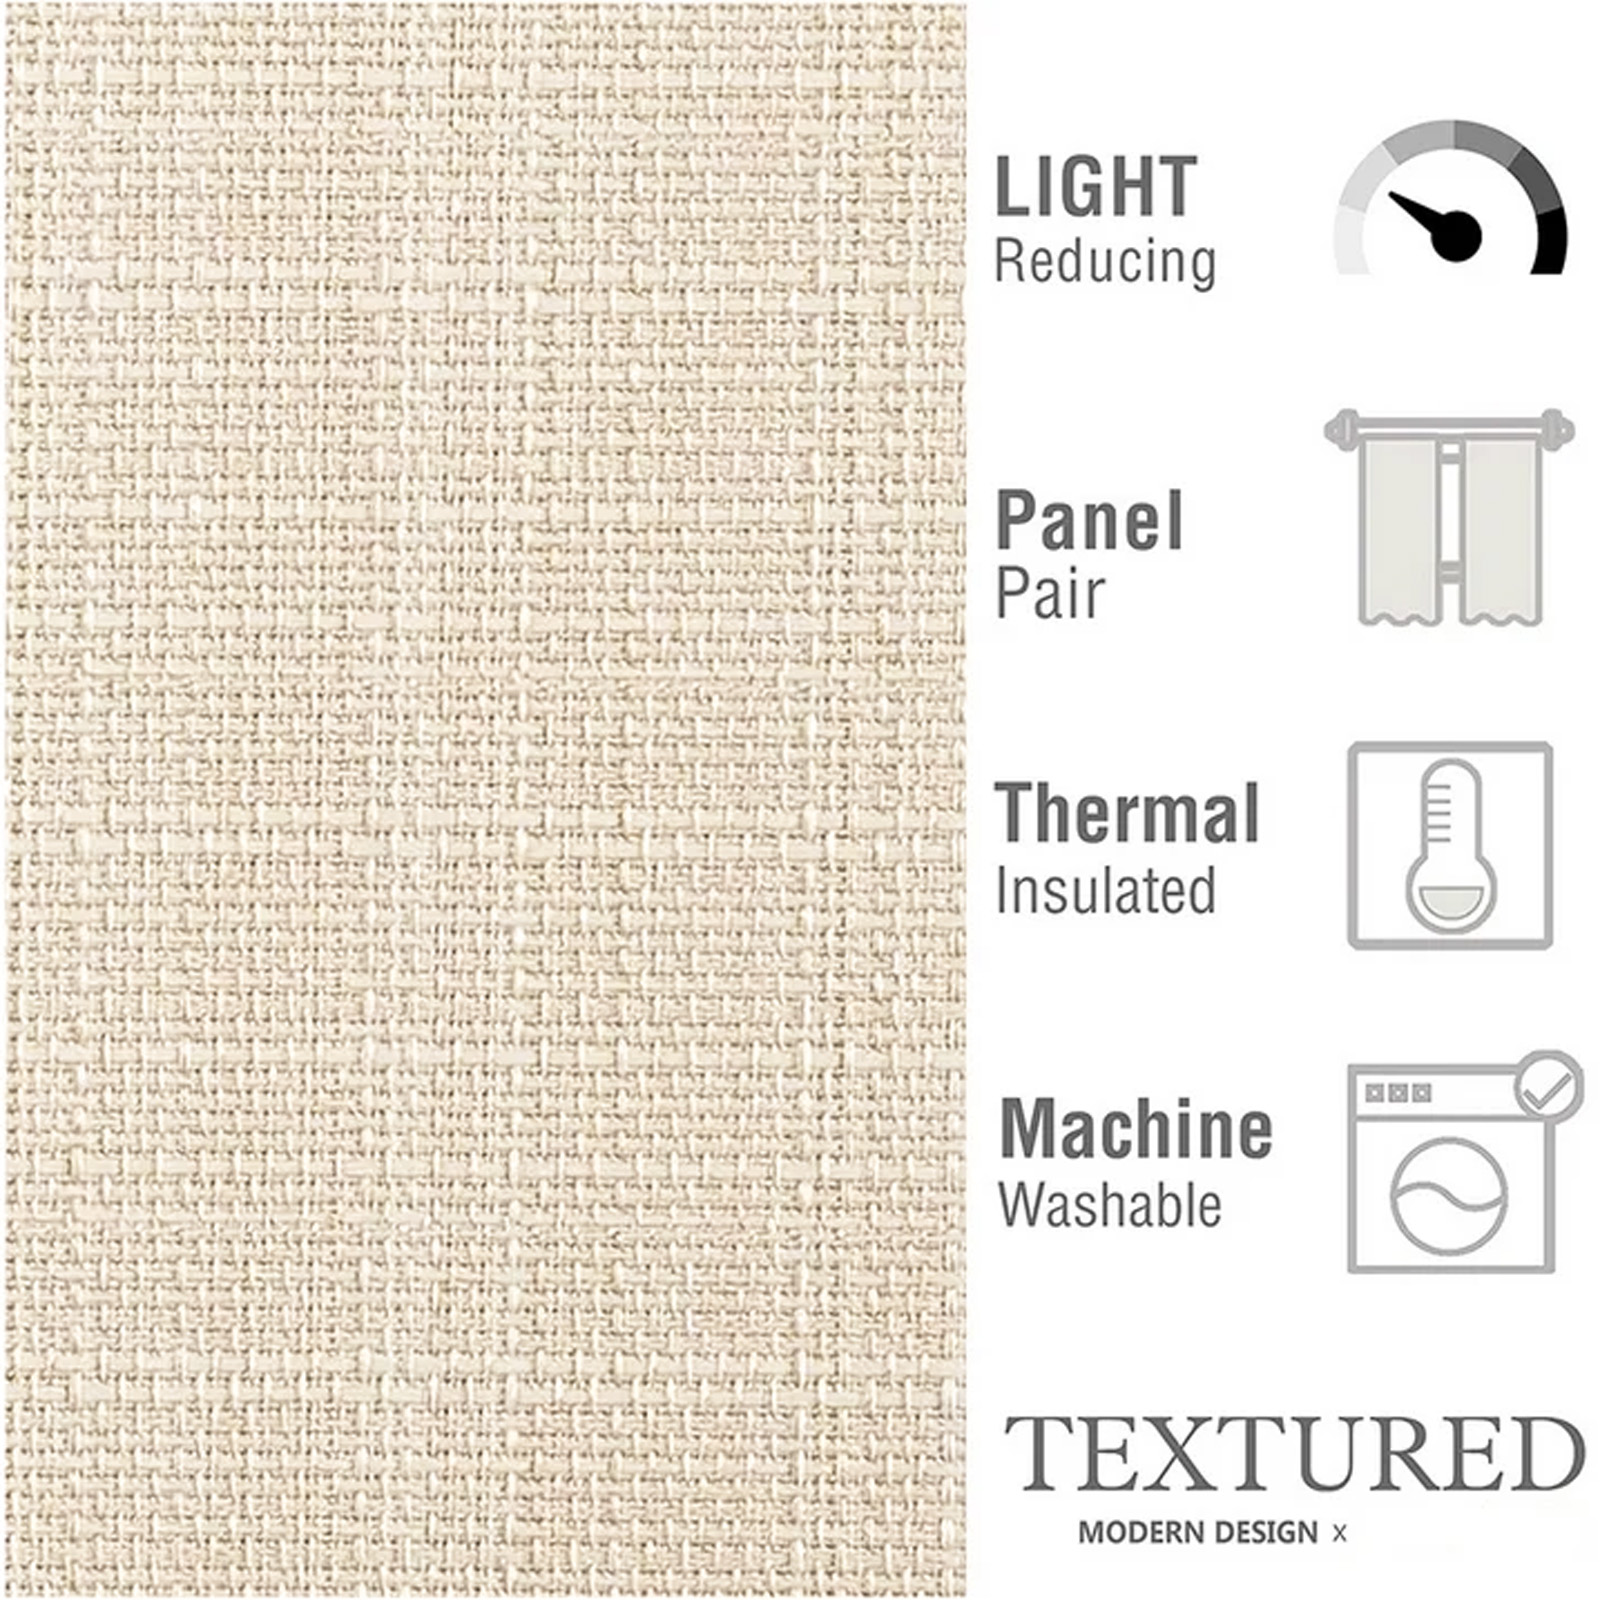 CURTAINKING Linen Textured Curtains 84 inches Beige Bedroom Living Room Window Curtain Set Light Filtering Drapes Grommet Top 2 Panels - image 5 of 8